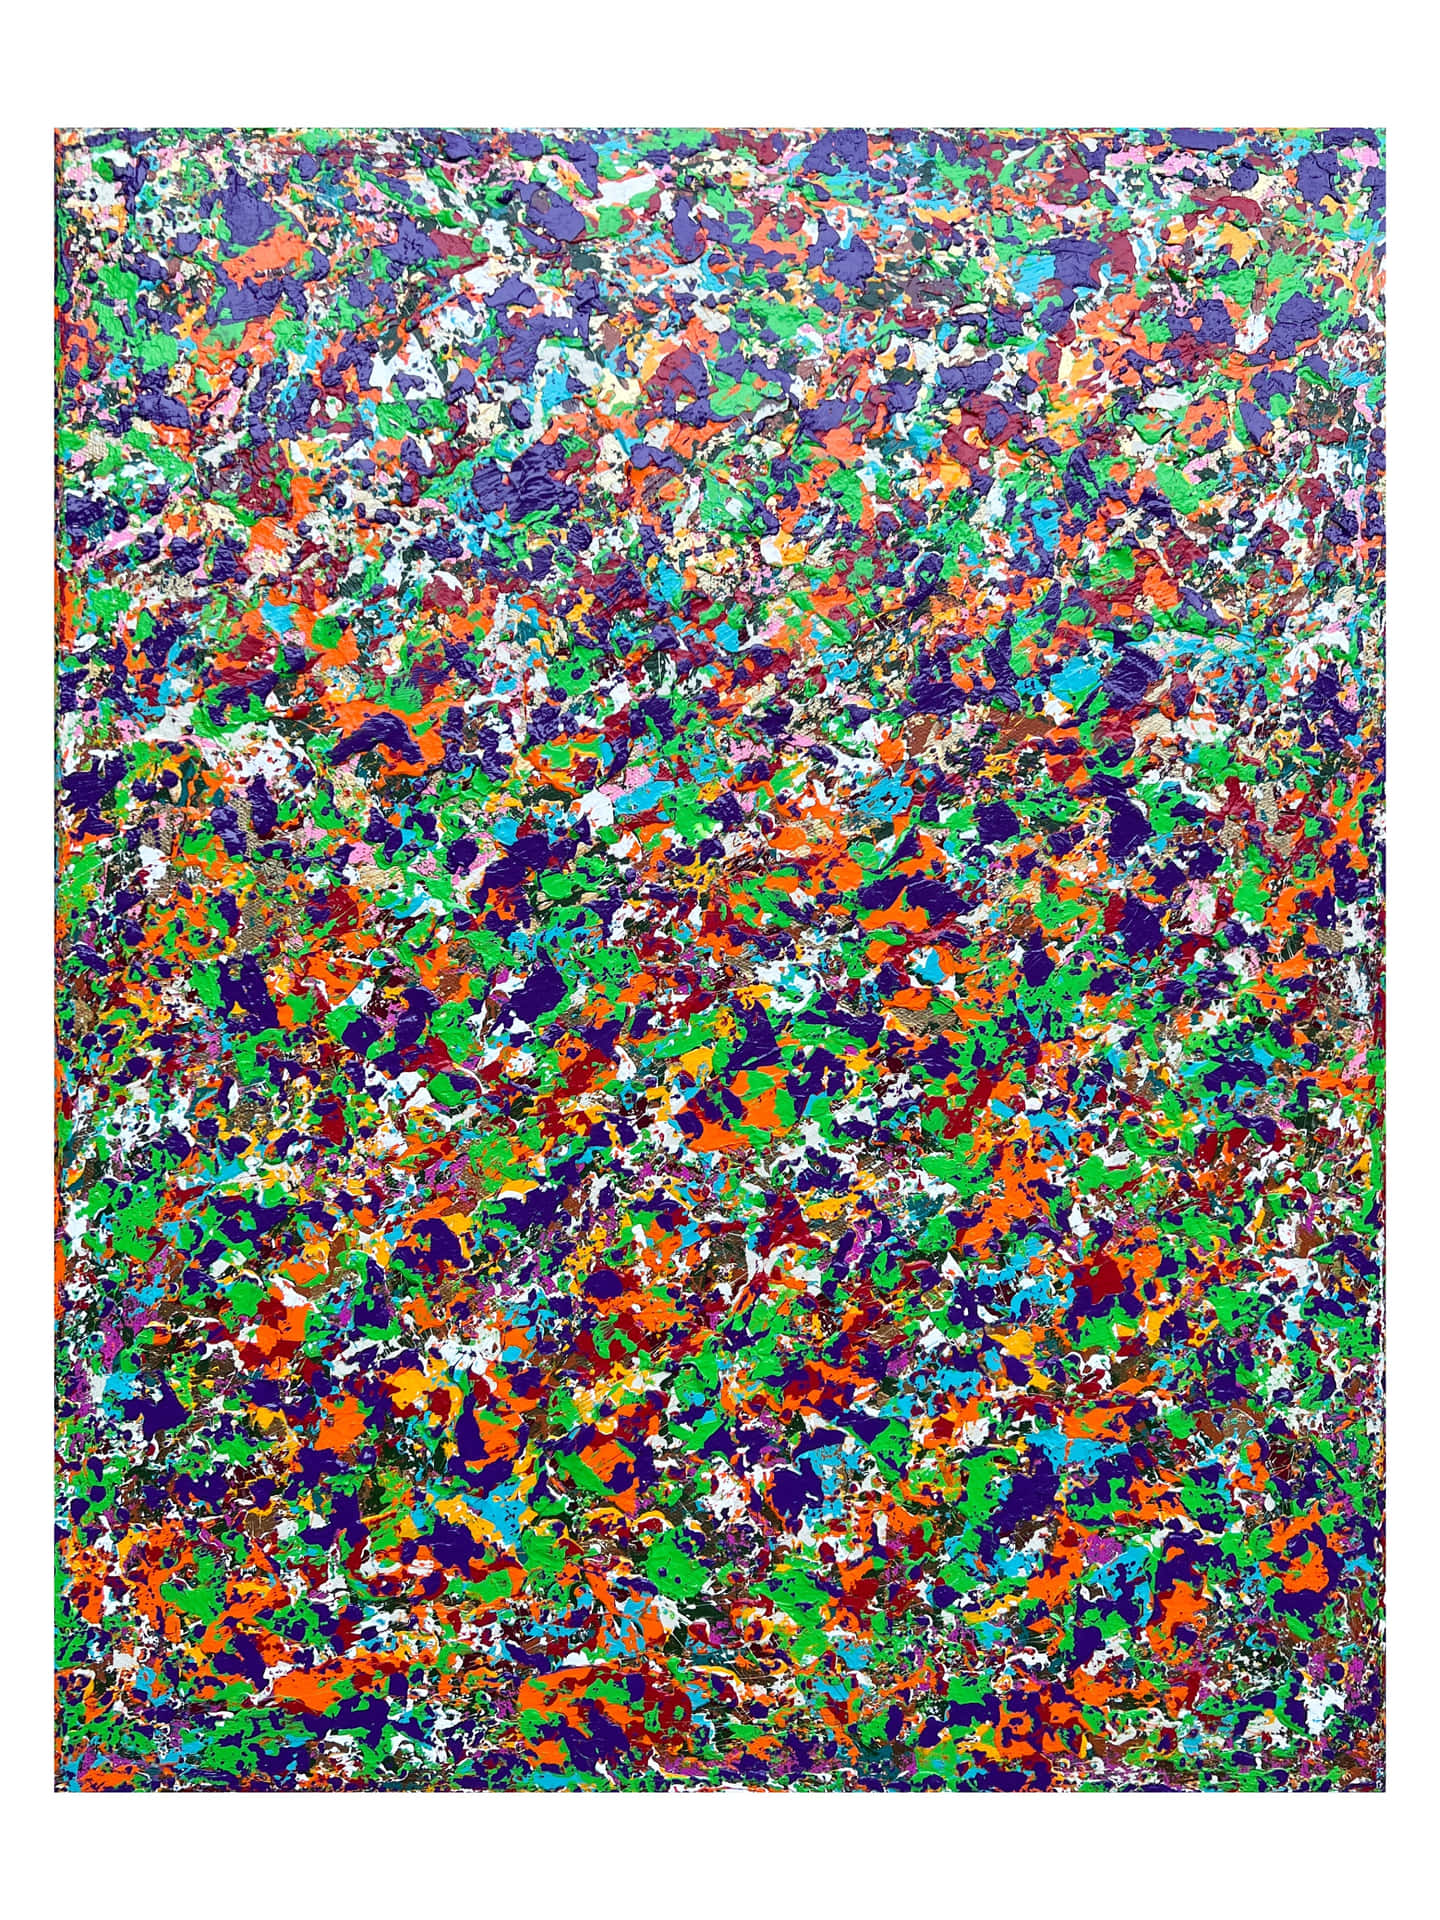 A Painting With Colorful Splashes On A White Background